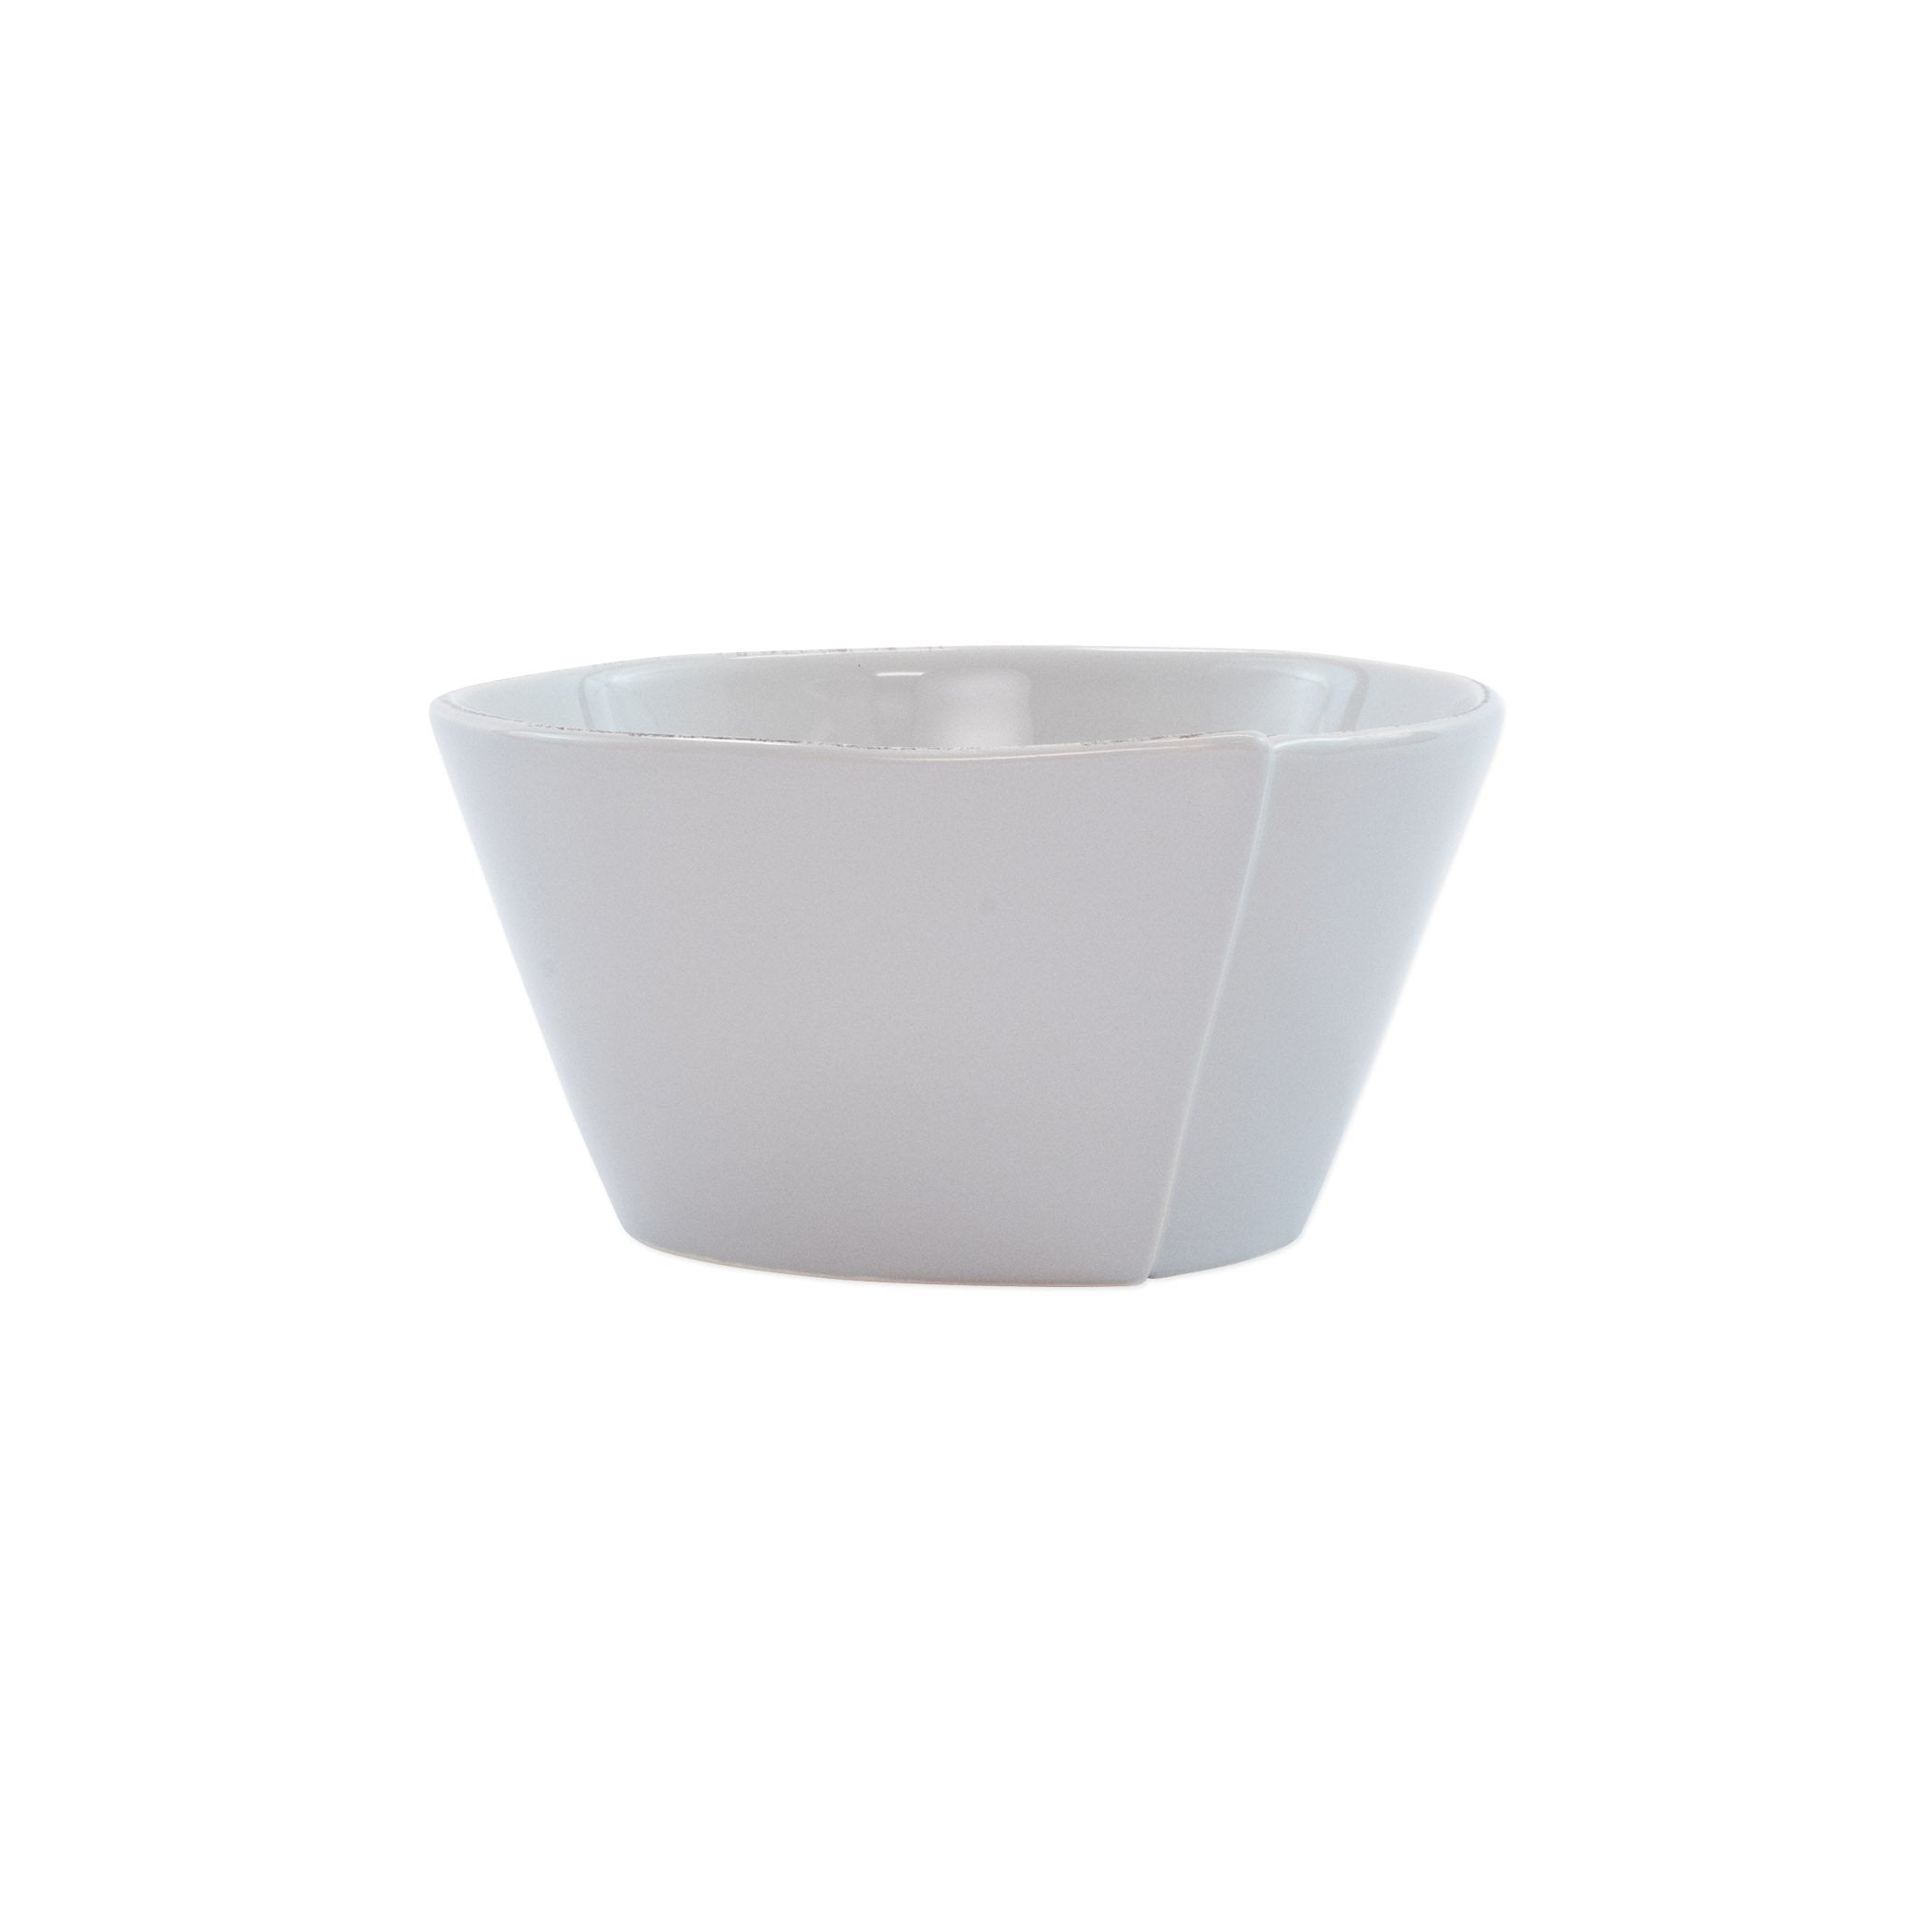 Lastra Light Gray Stacking Cereal Bowl